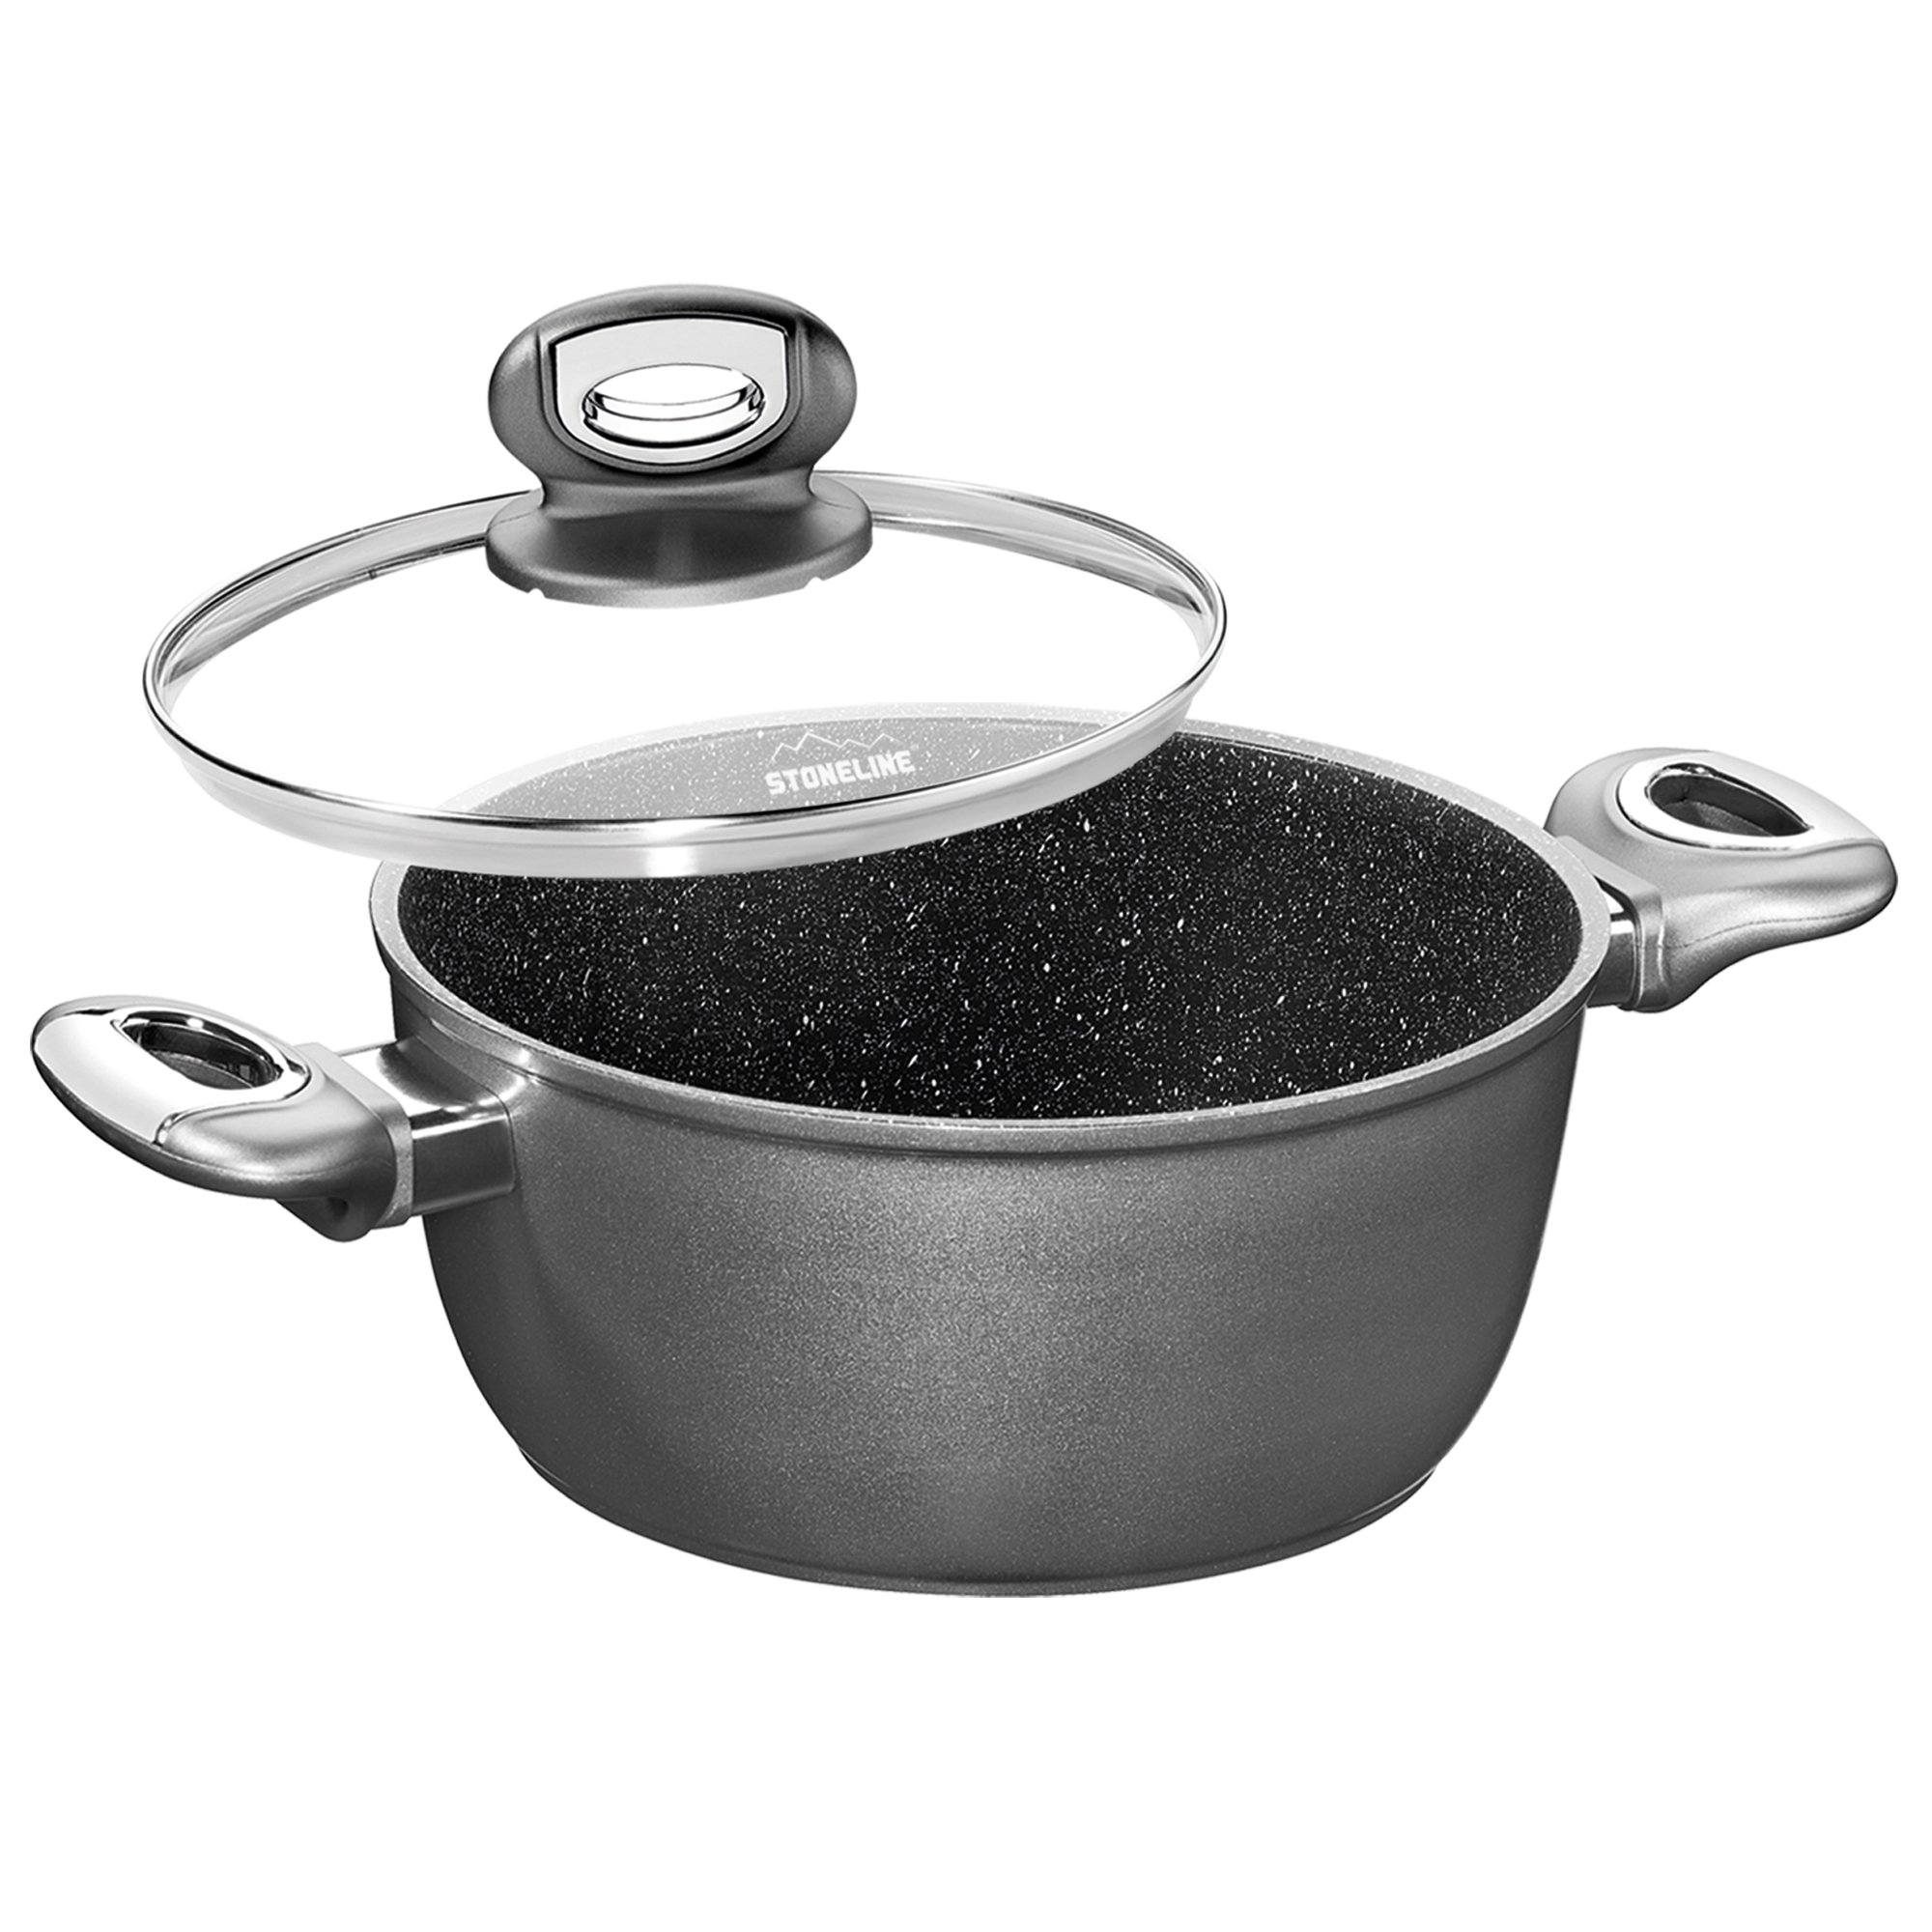 STONELINE® Cooking Pot 20 cm, with Lid, Non-Stick Pot | Made in Germany | GOURMUNDO